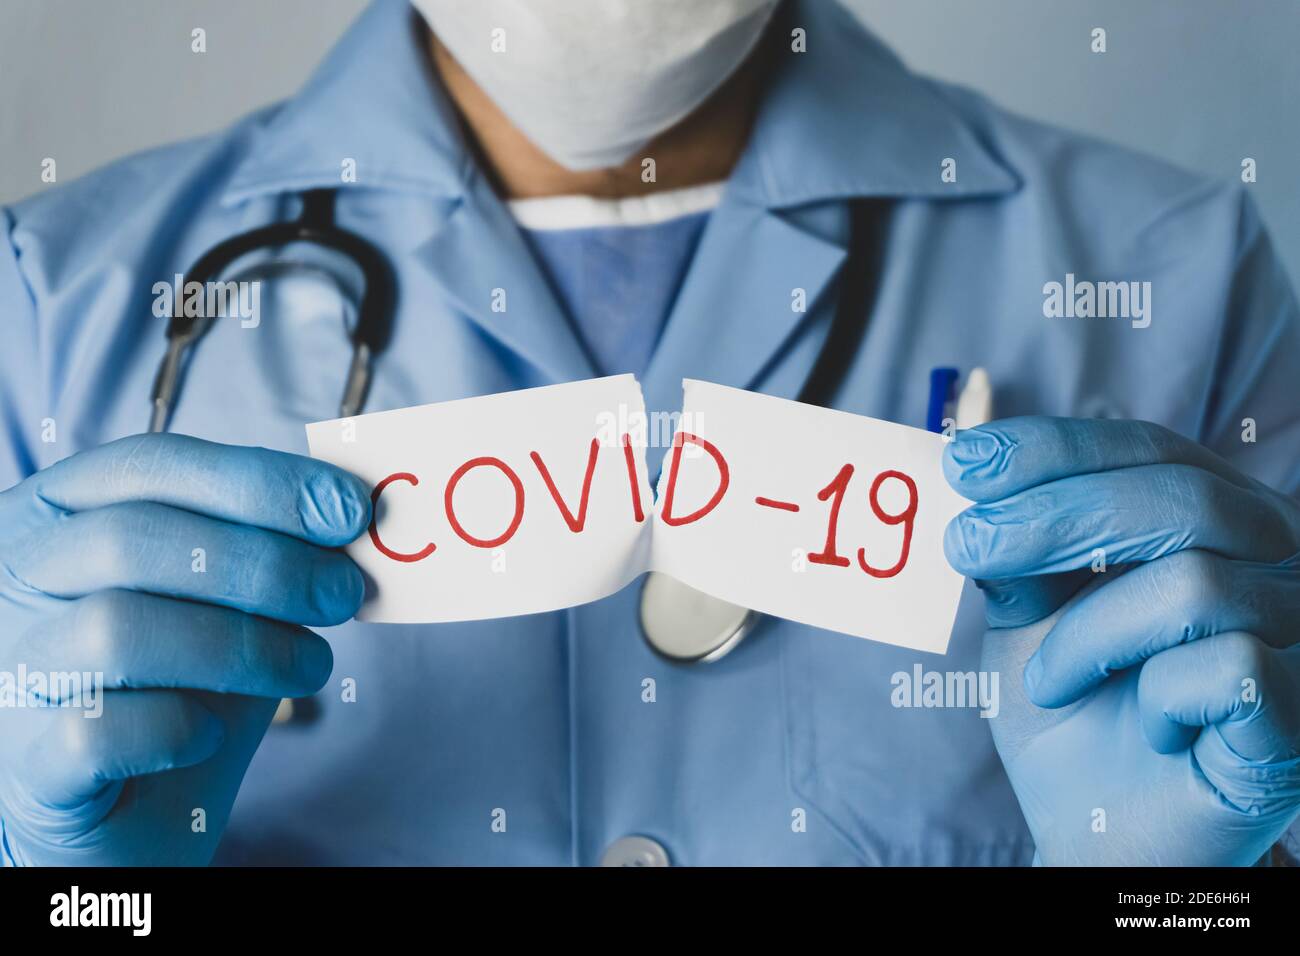 The doctor tears off the white paper that says Covid-19. Coronavirus outbreak concept. Stock Photo